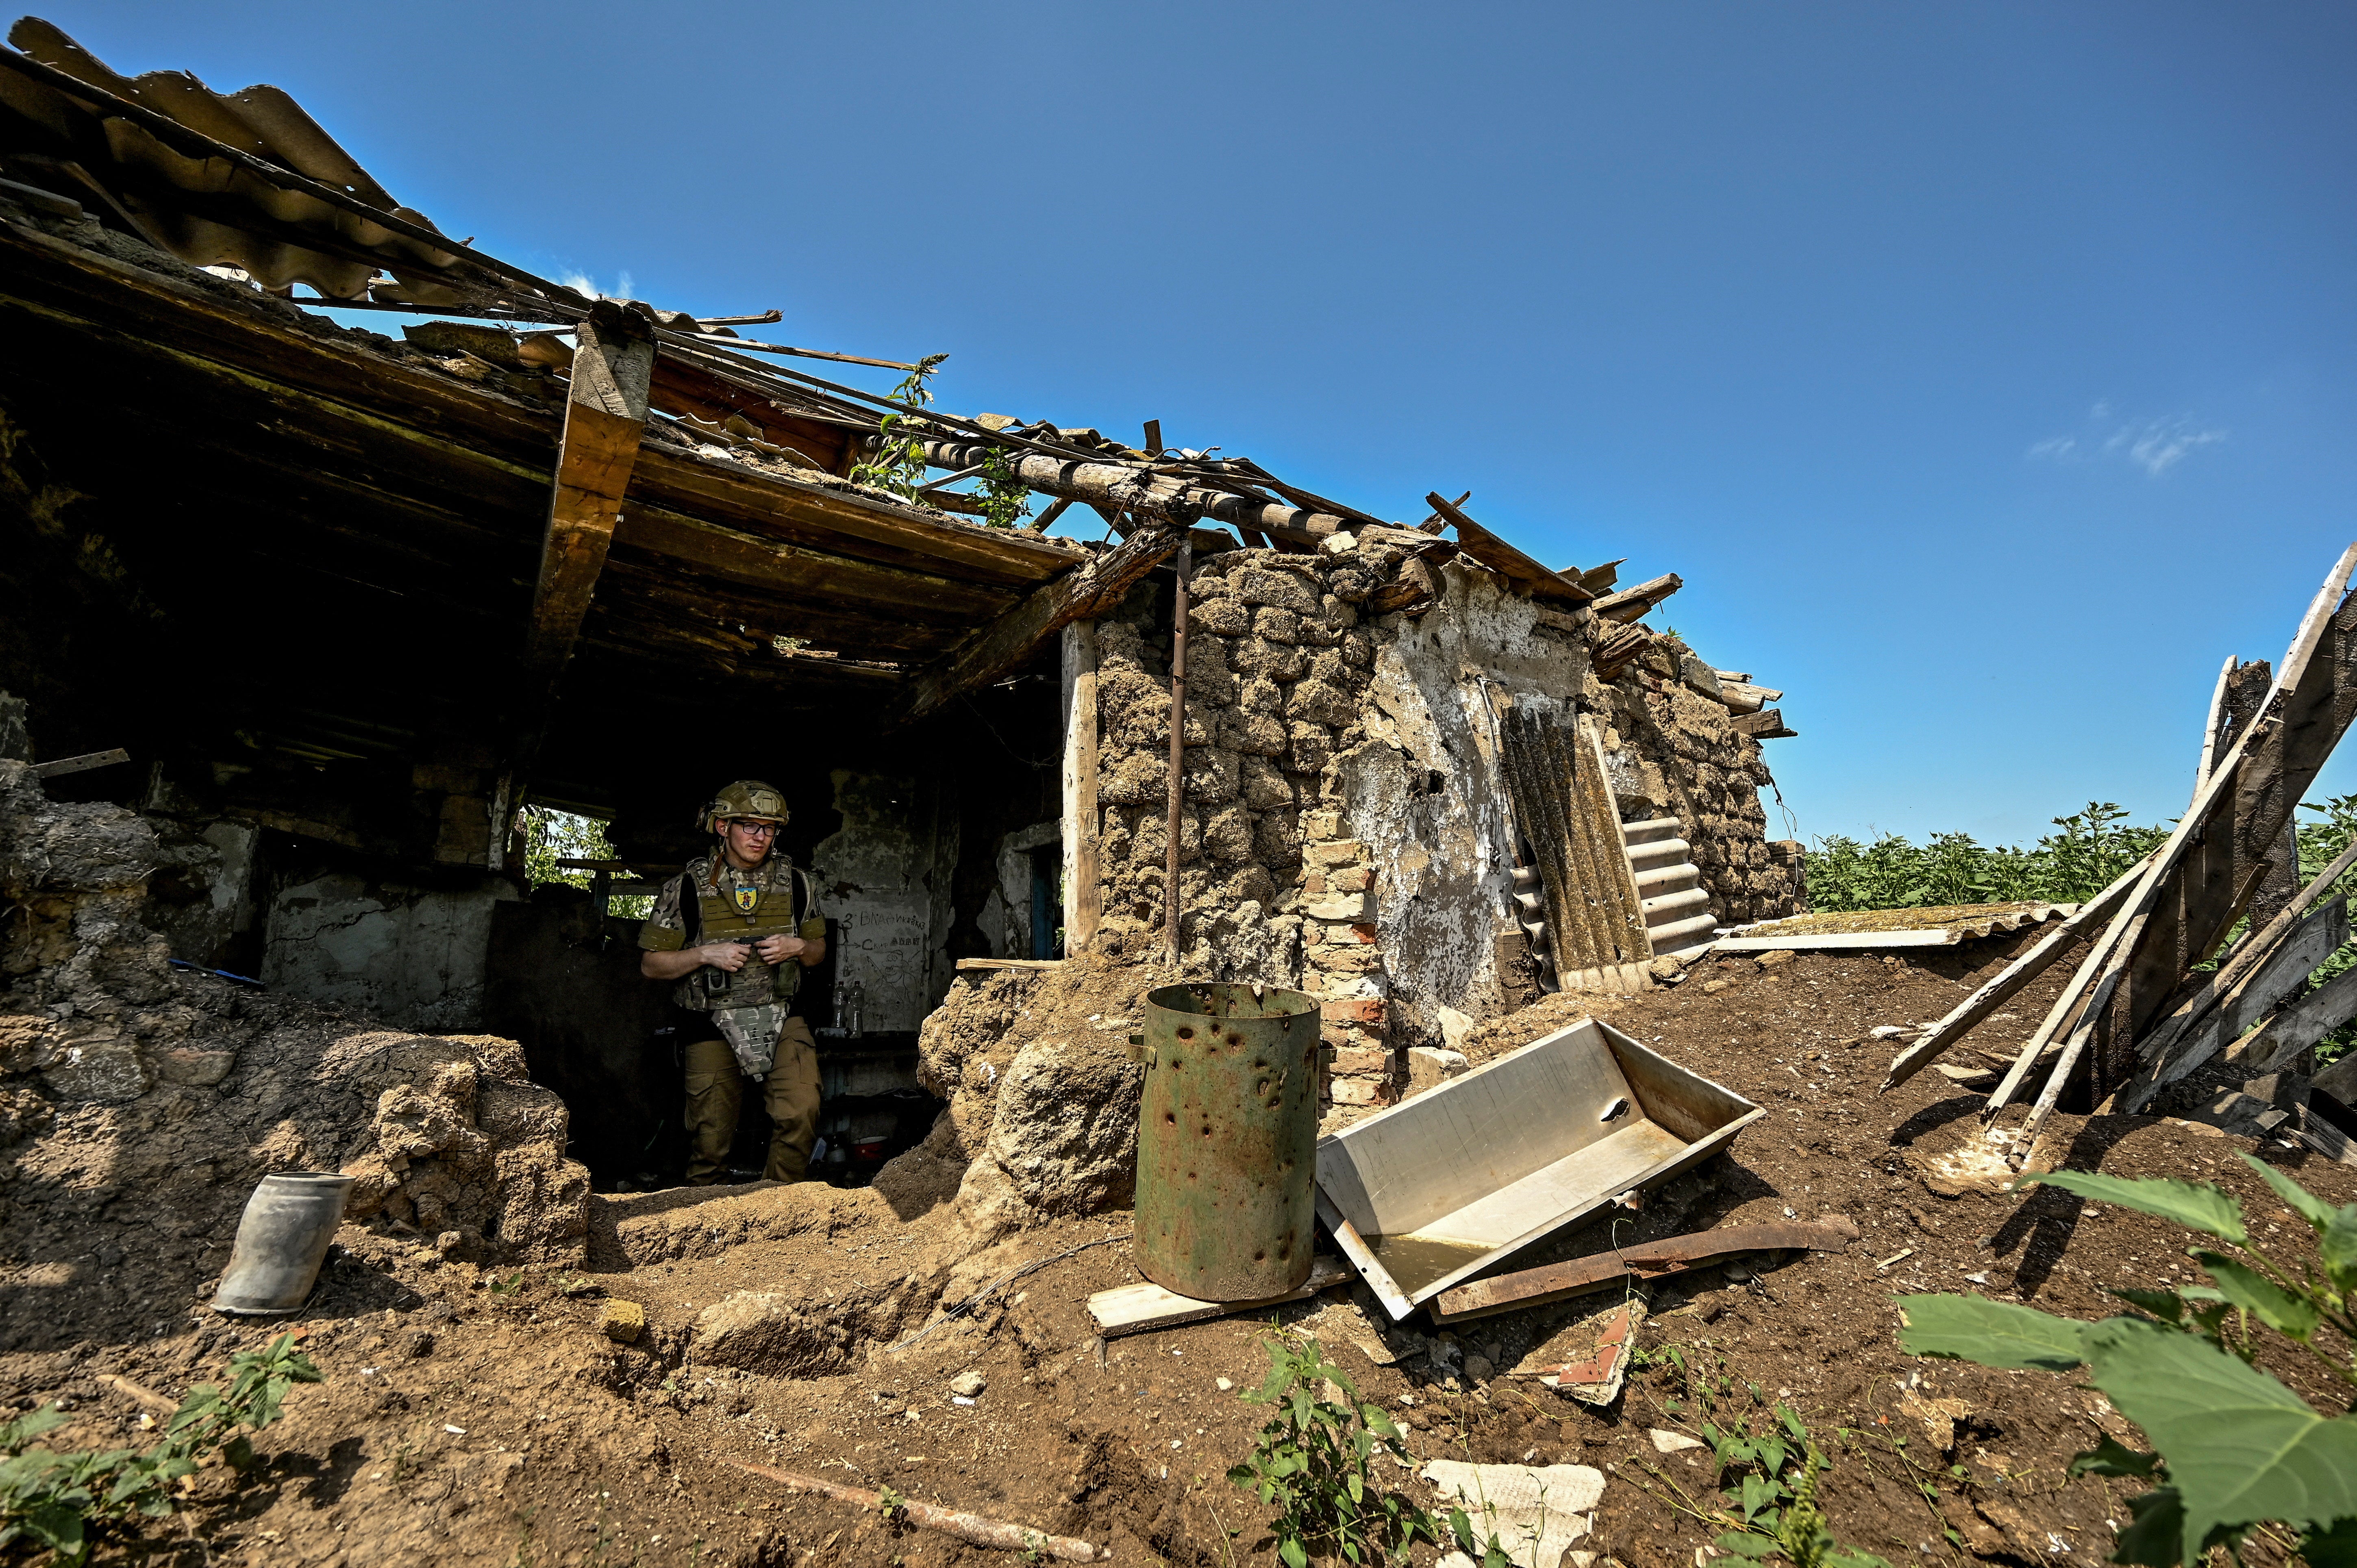 Ukrainian serviceman inspects a former position of Russian troops in the recently liberated village of Novodarivka